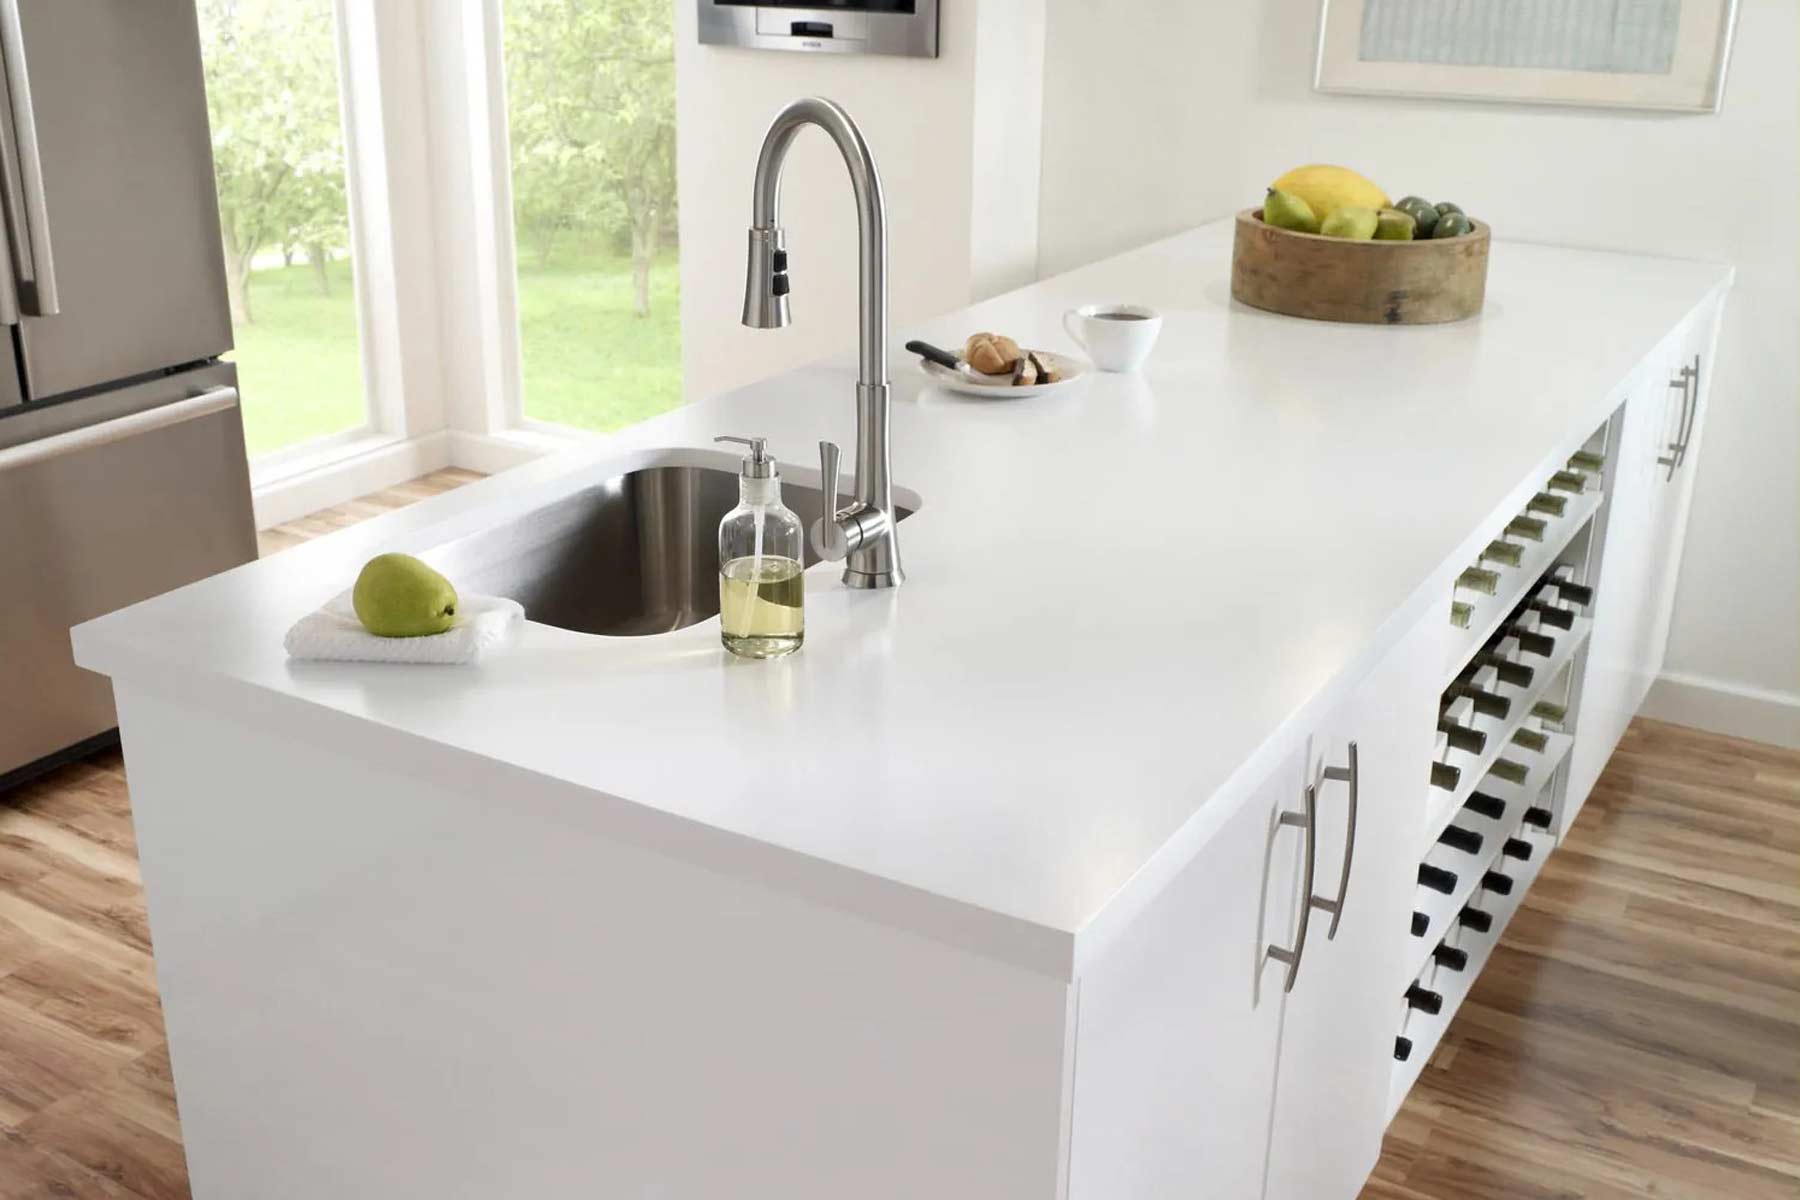 How Thick Are Corian Countertops